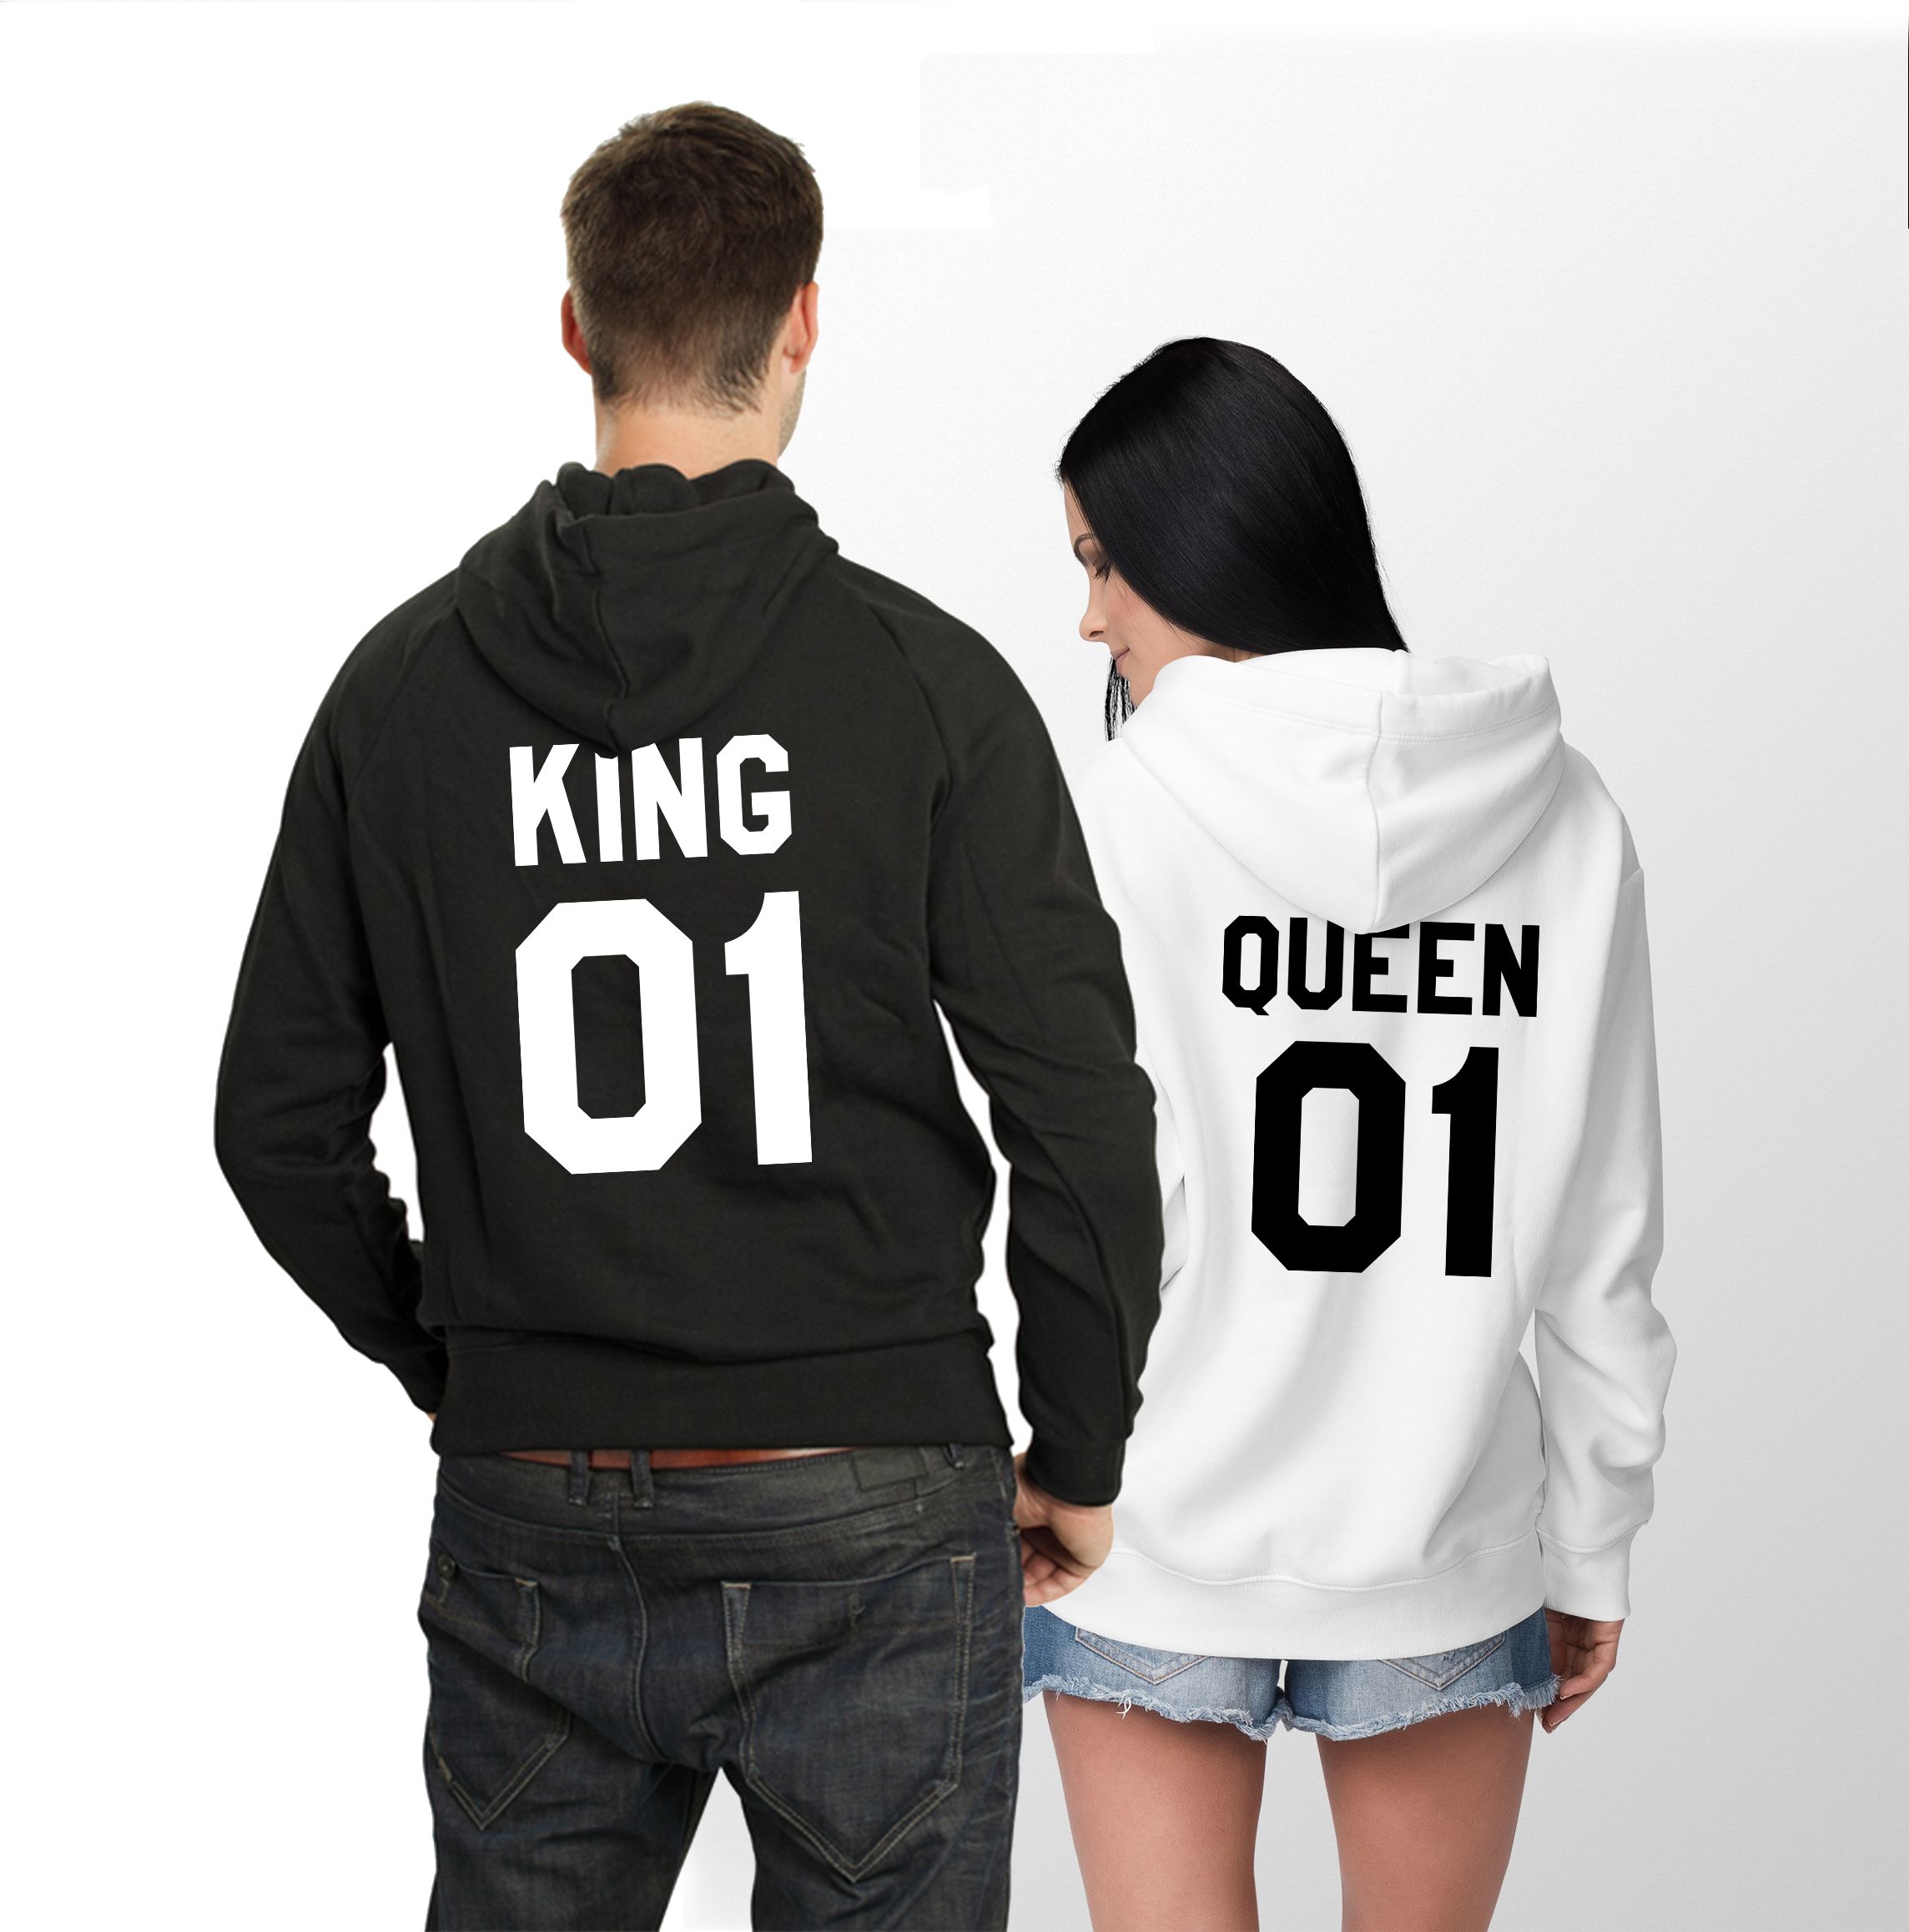 King & Queen hoodies for mom and dad  hooded sweatshirt